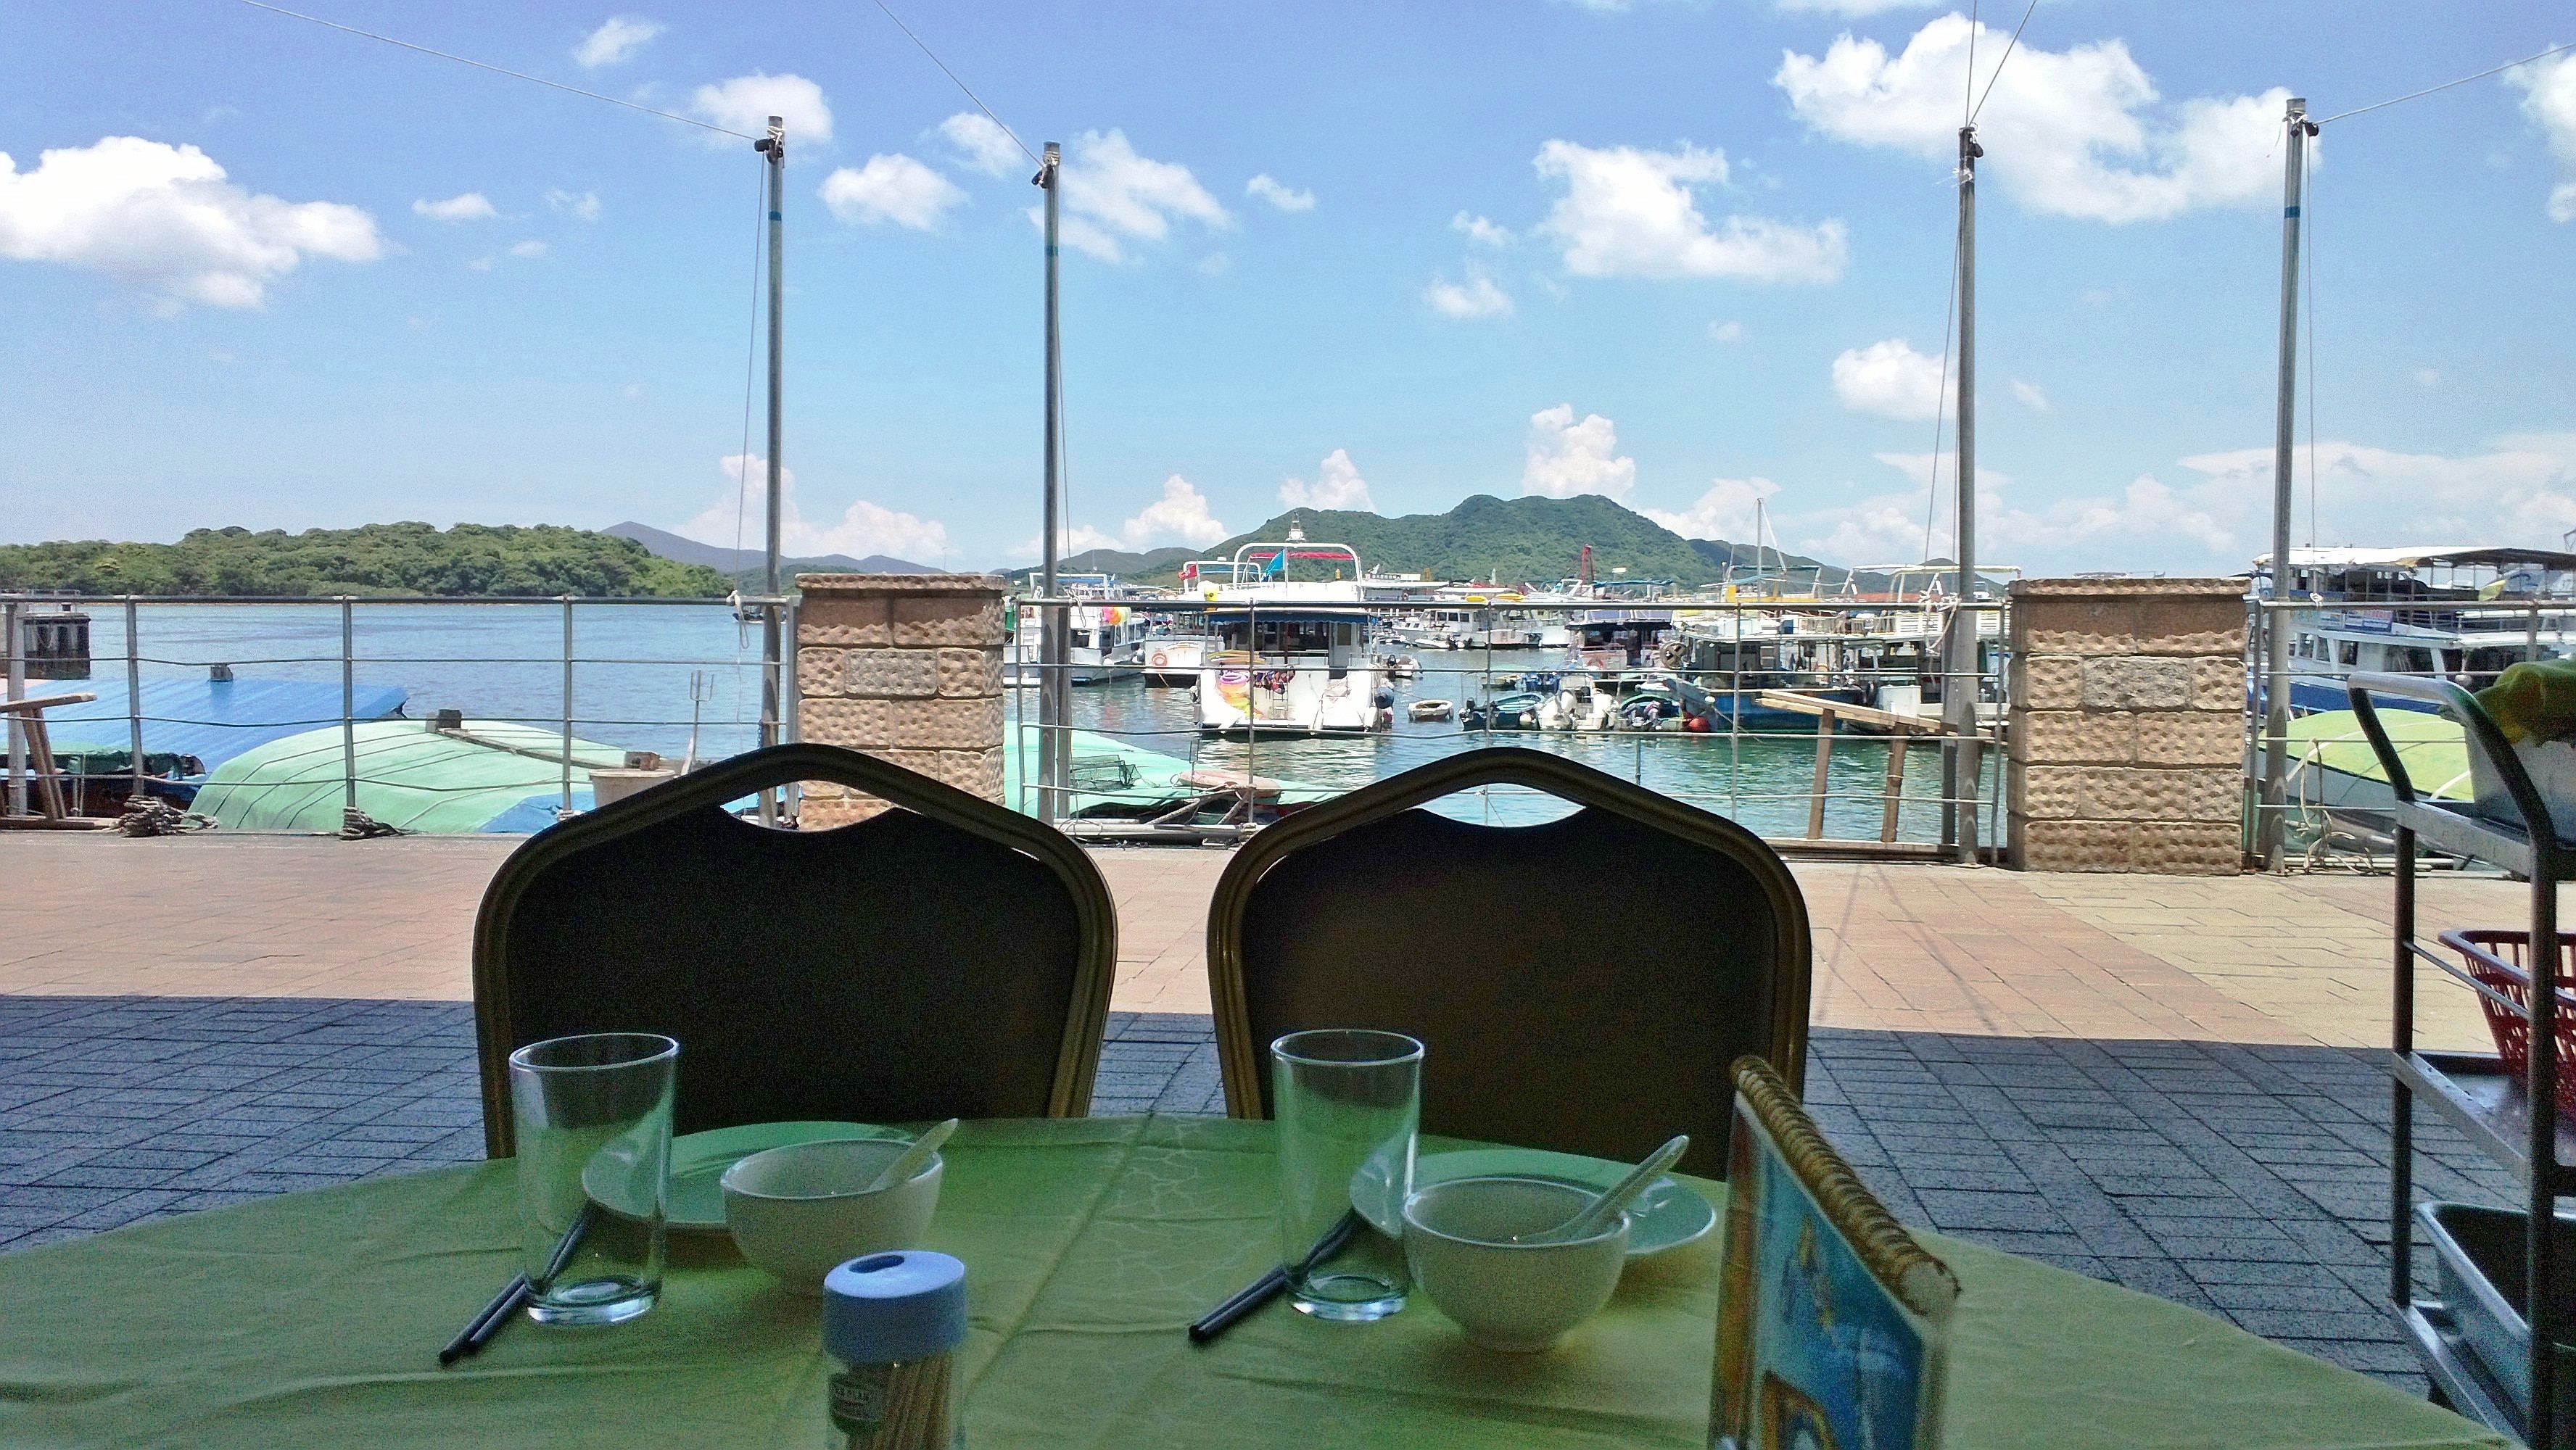 Enjoy Sai Kung local seafood lunch near the waterfront